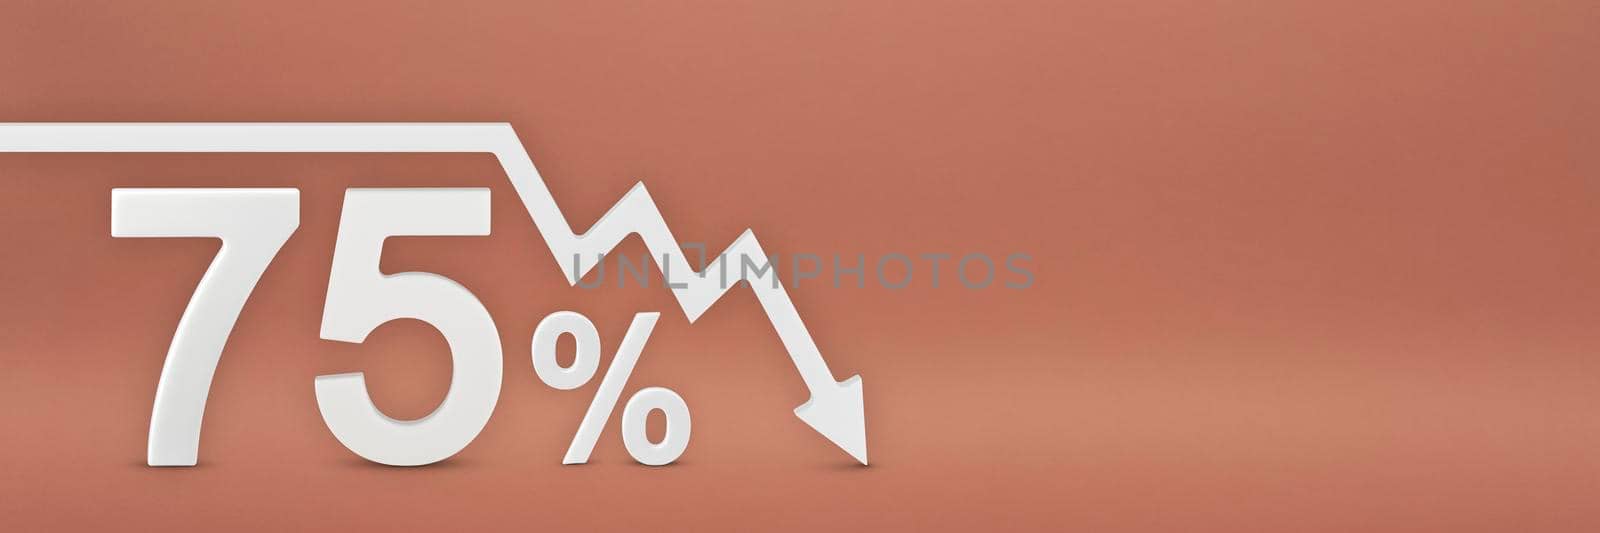 seventy-five percent, the arrow on the graph is pointing down. Stock market crash, bear market, inflation.Economic collapse, collapse of stocks.3d banner,75 percent discount sign on a red background. by SERSOL